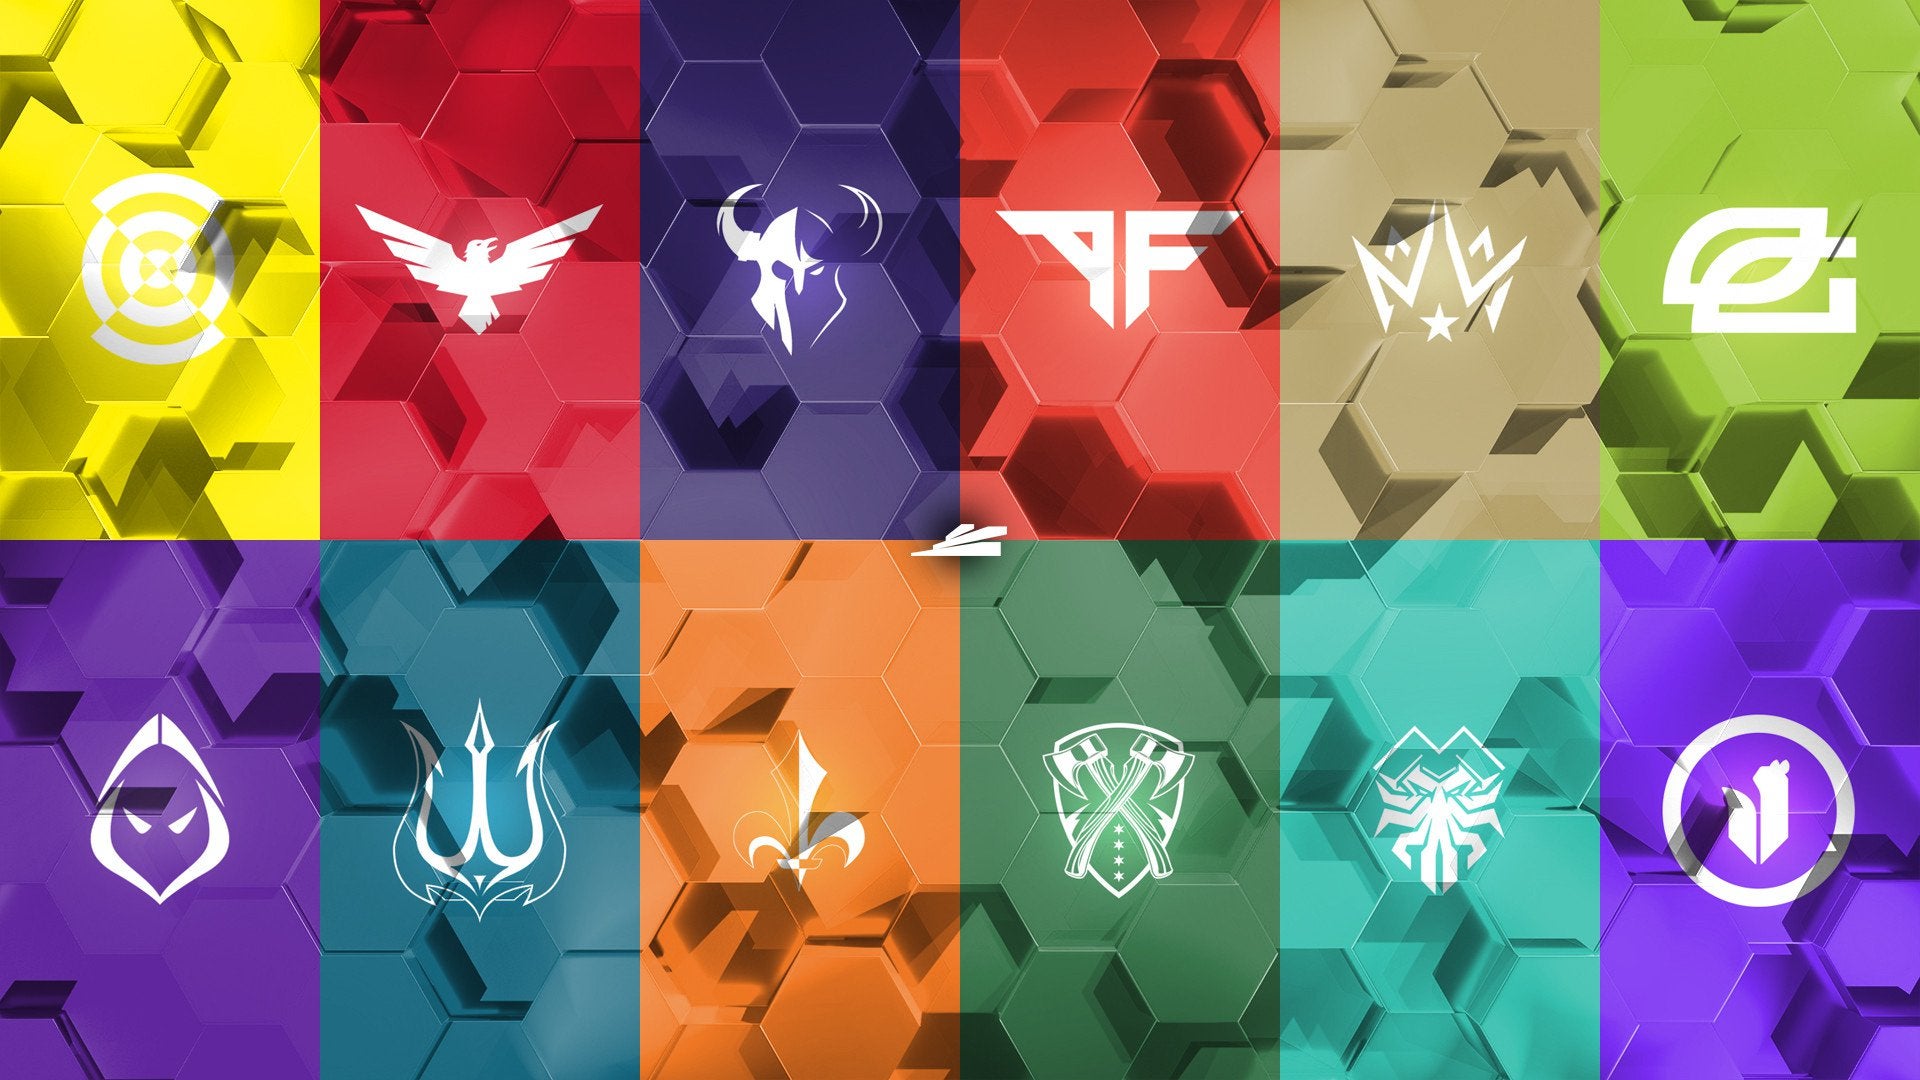 Made some desktop wallpaper that include all 2020 Call of Duty League teams